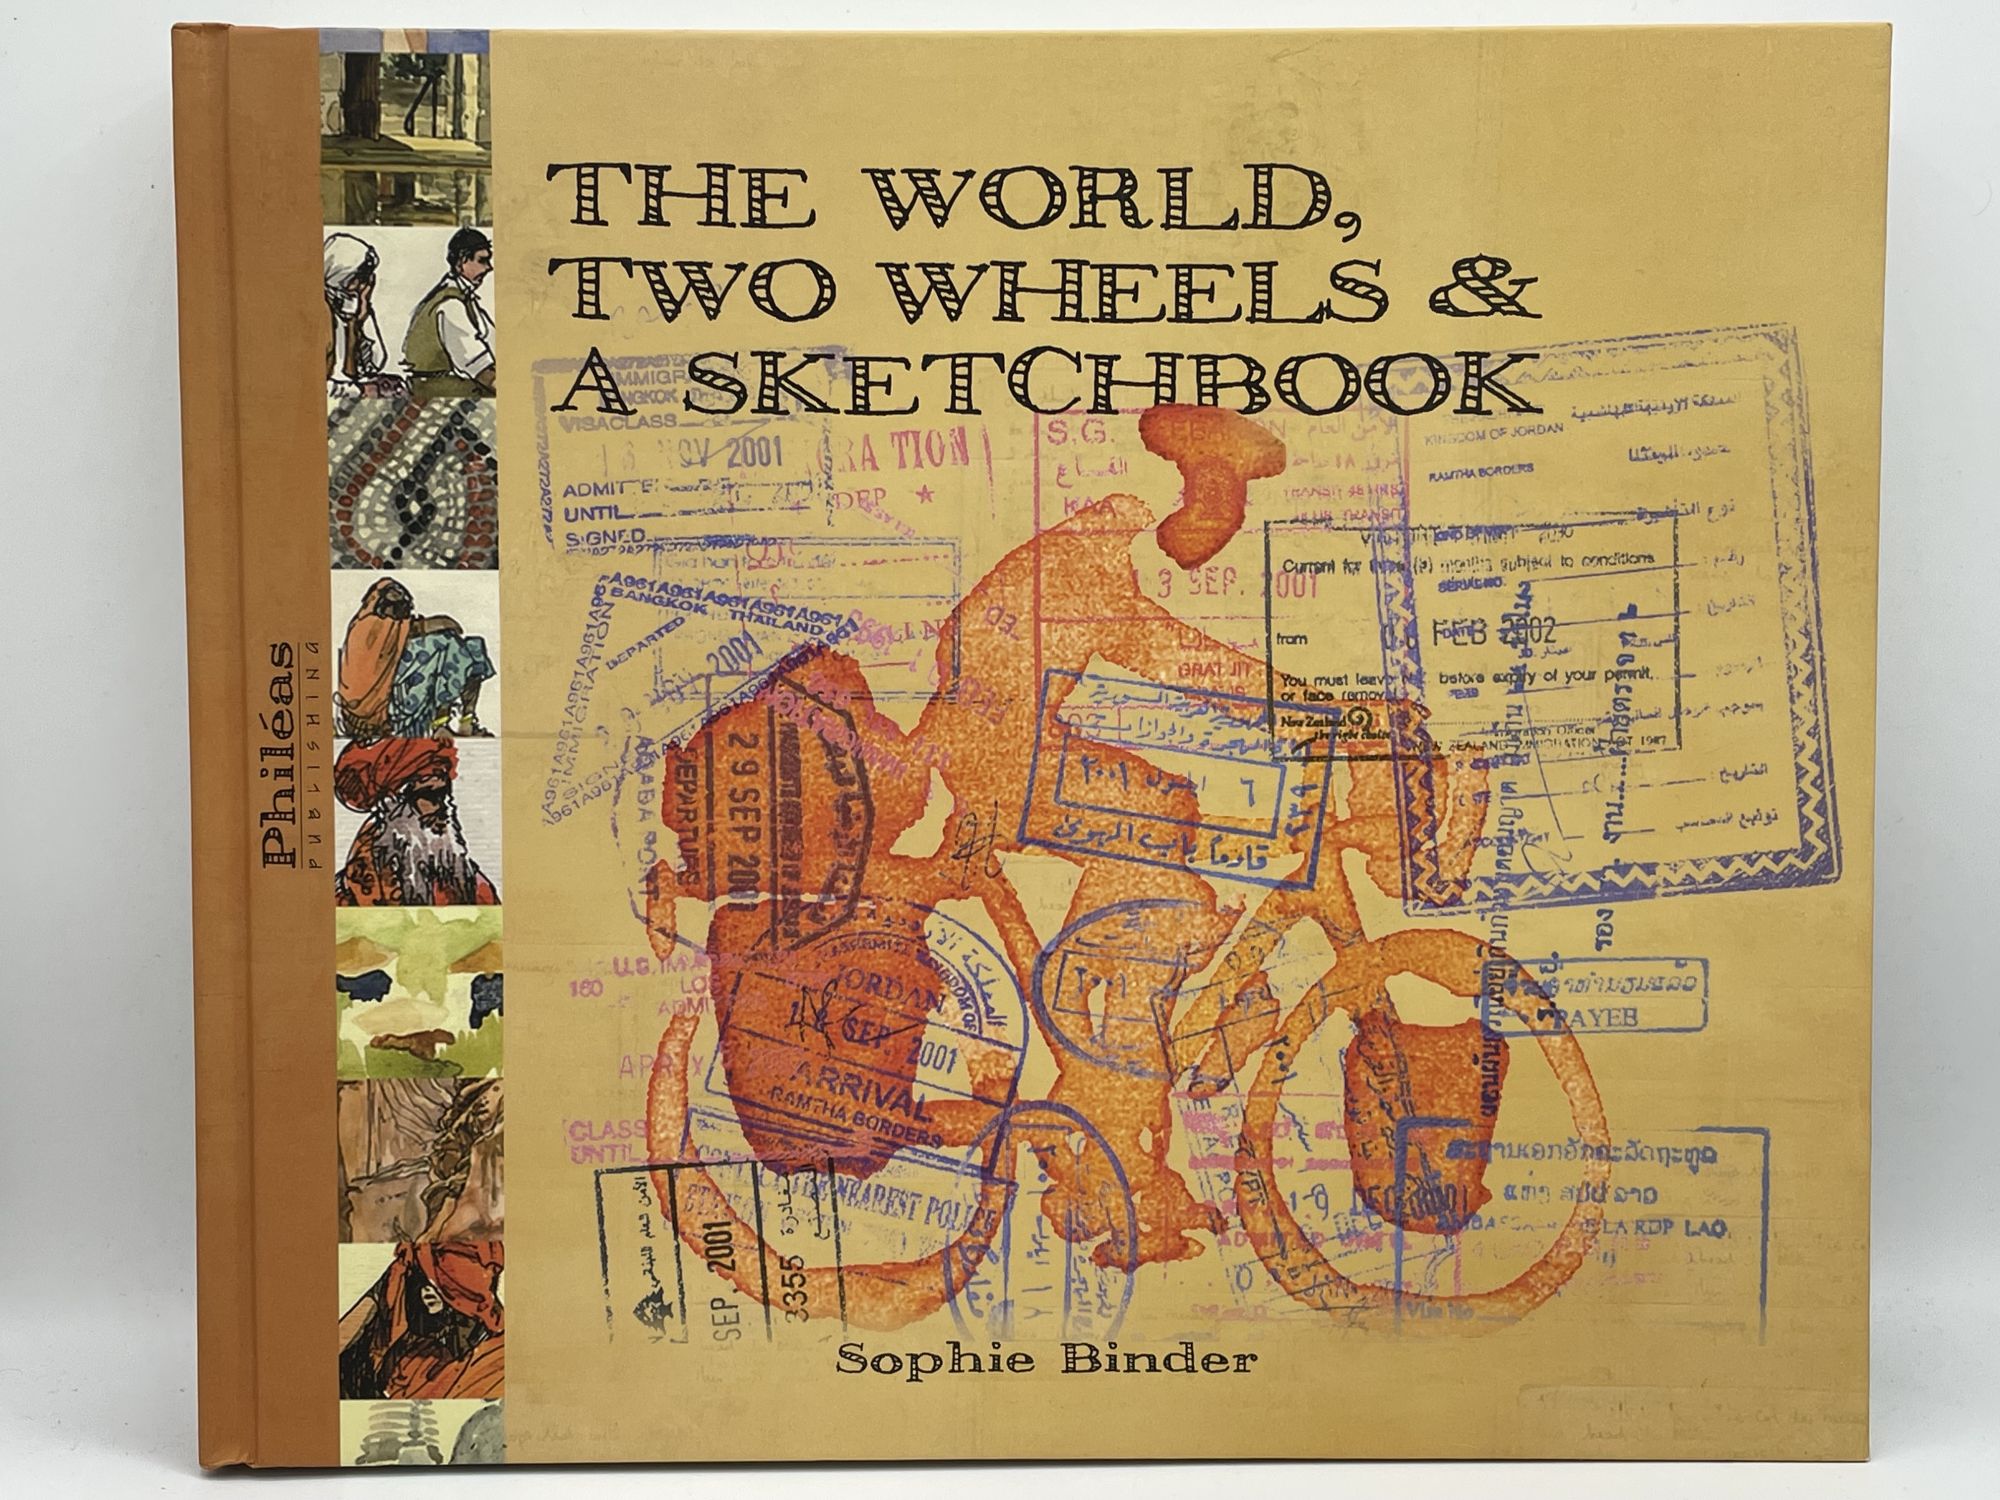 The World, Two Wheels & a Sketchbook BINDER, Sophie [SIGNED] [Very Good] [Hardcover] Oblong 4to. Boards. Full color illustrations. 283 pp. Signed on title page. Sticker residue on rear board. This is a signed travel journal by artist Binder chronicling her solo bicycle adventure around the world.